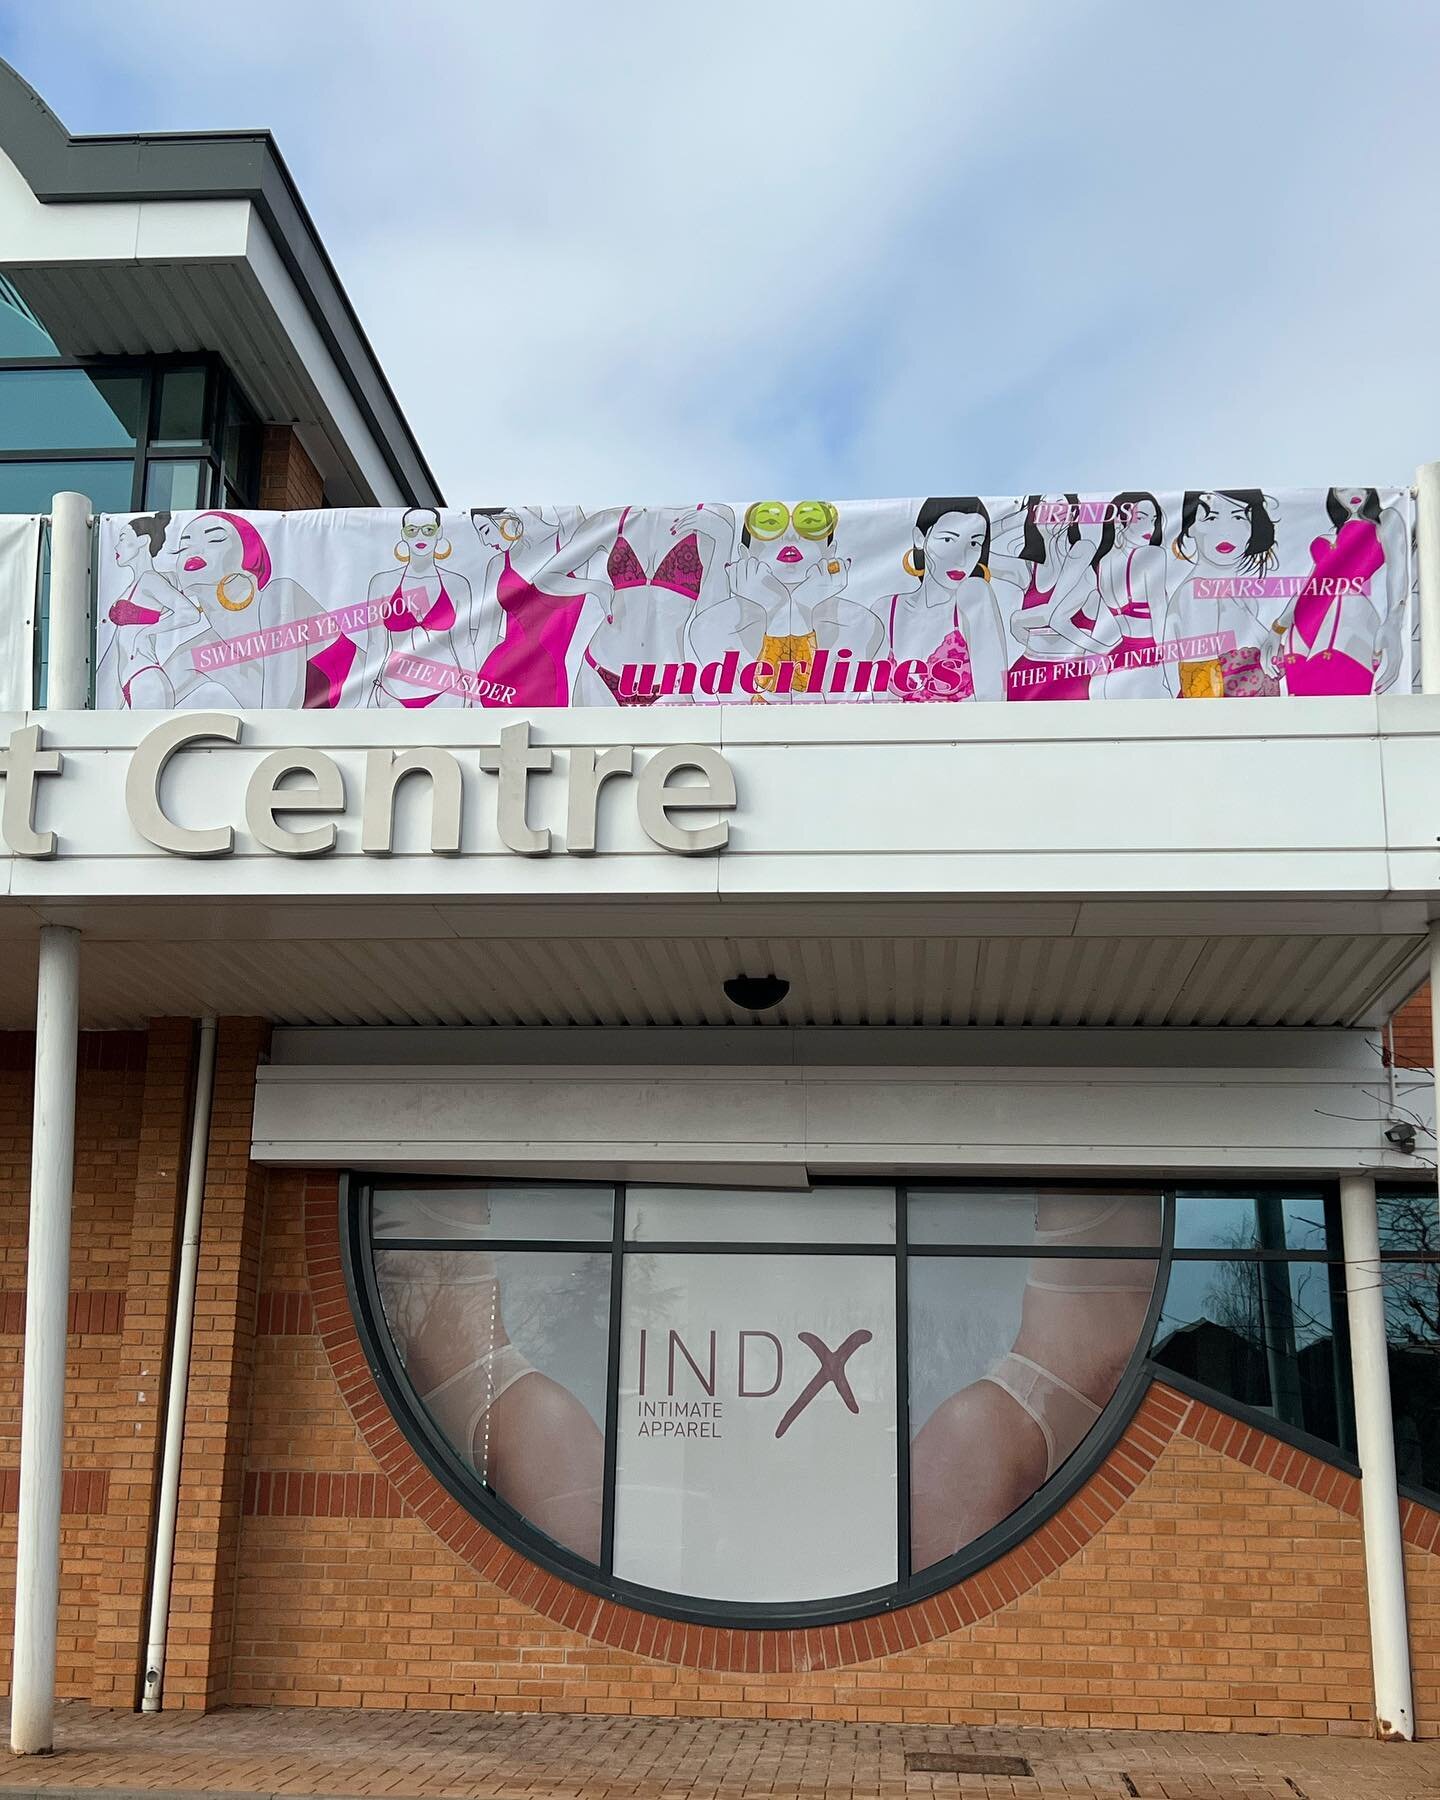 💕Big enough for you?!?! Massive lingerie banner for @underlines_magazine at @indxfashion this week. 💕